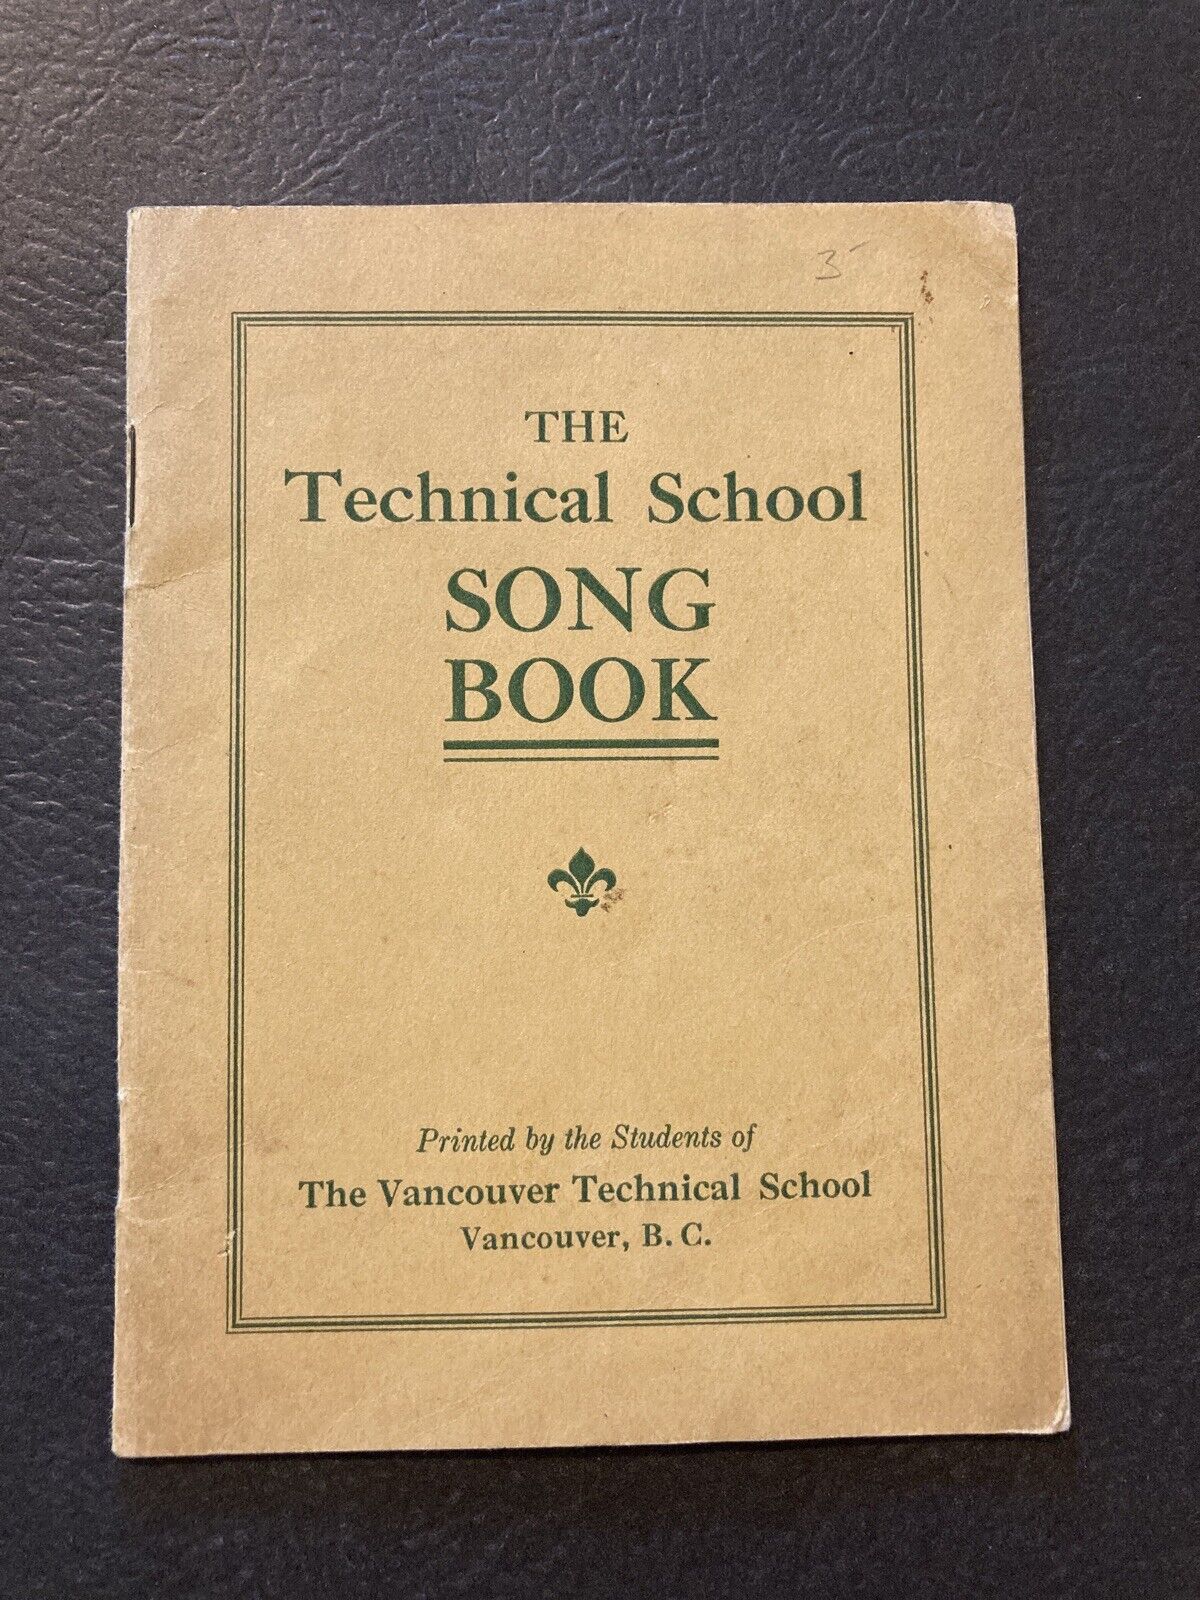 Vintage 1922 Song Book, The Technical School, Vancouver B.C. Song Book Music X7